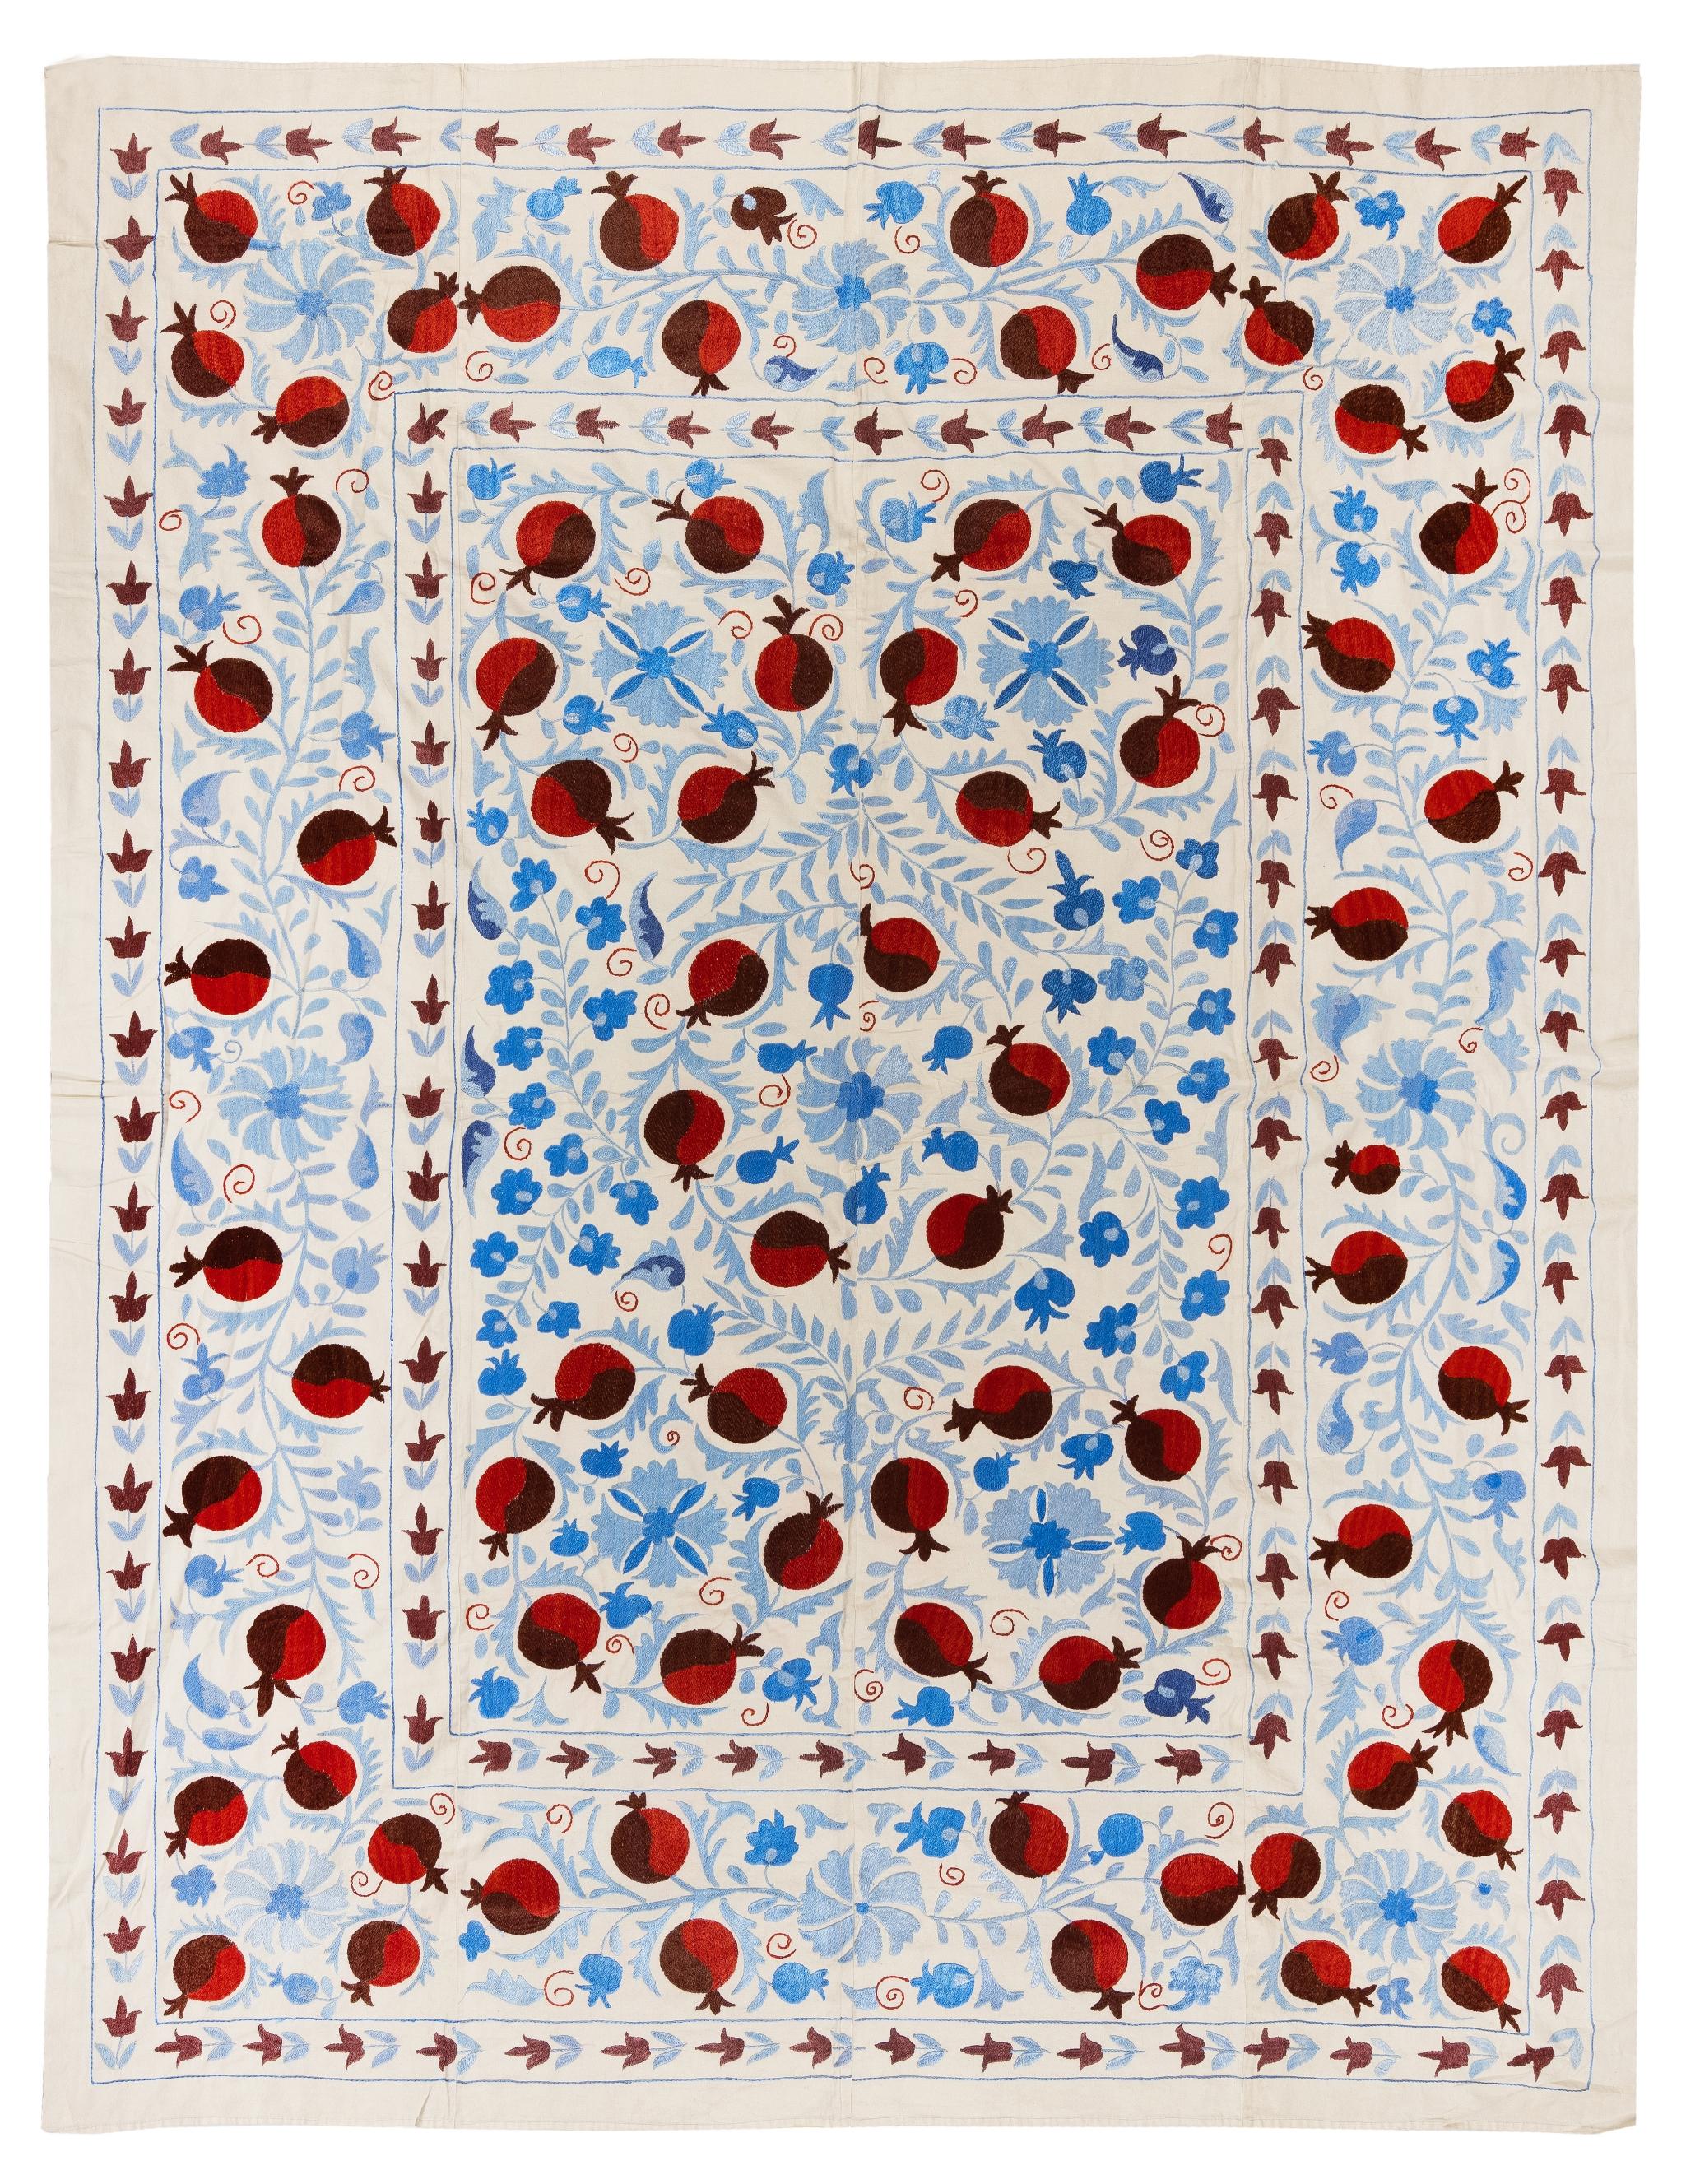 6.3x8 Ft Silk Embroidery Bed Cover in Cream, Red & Light Blue. Suzani Tablecloth